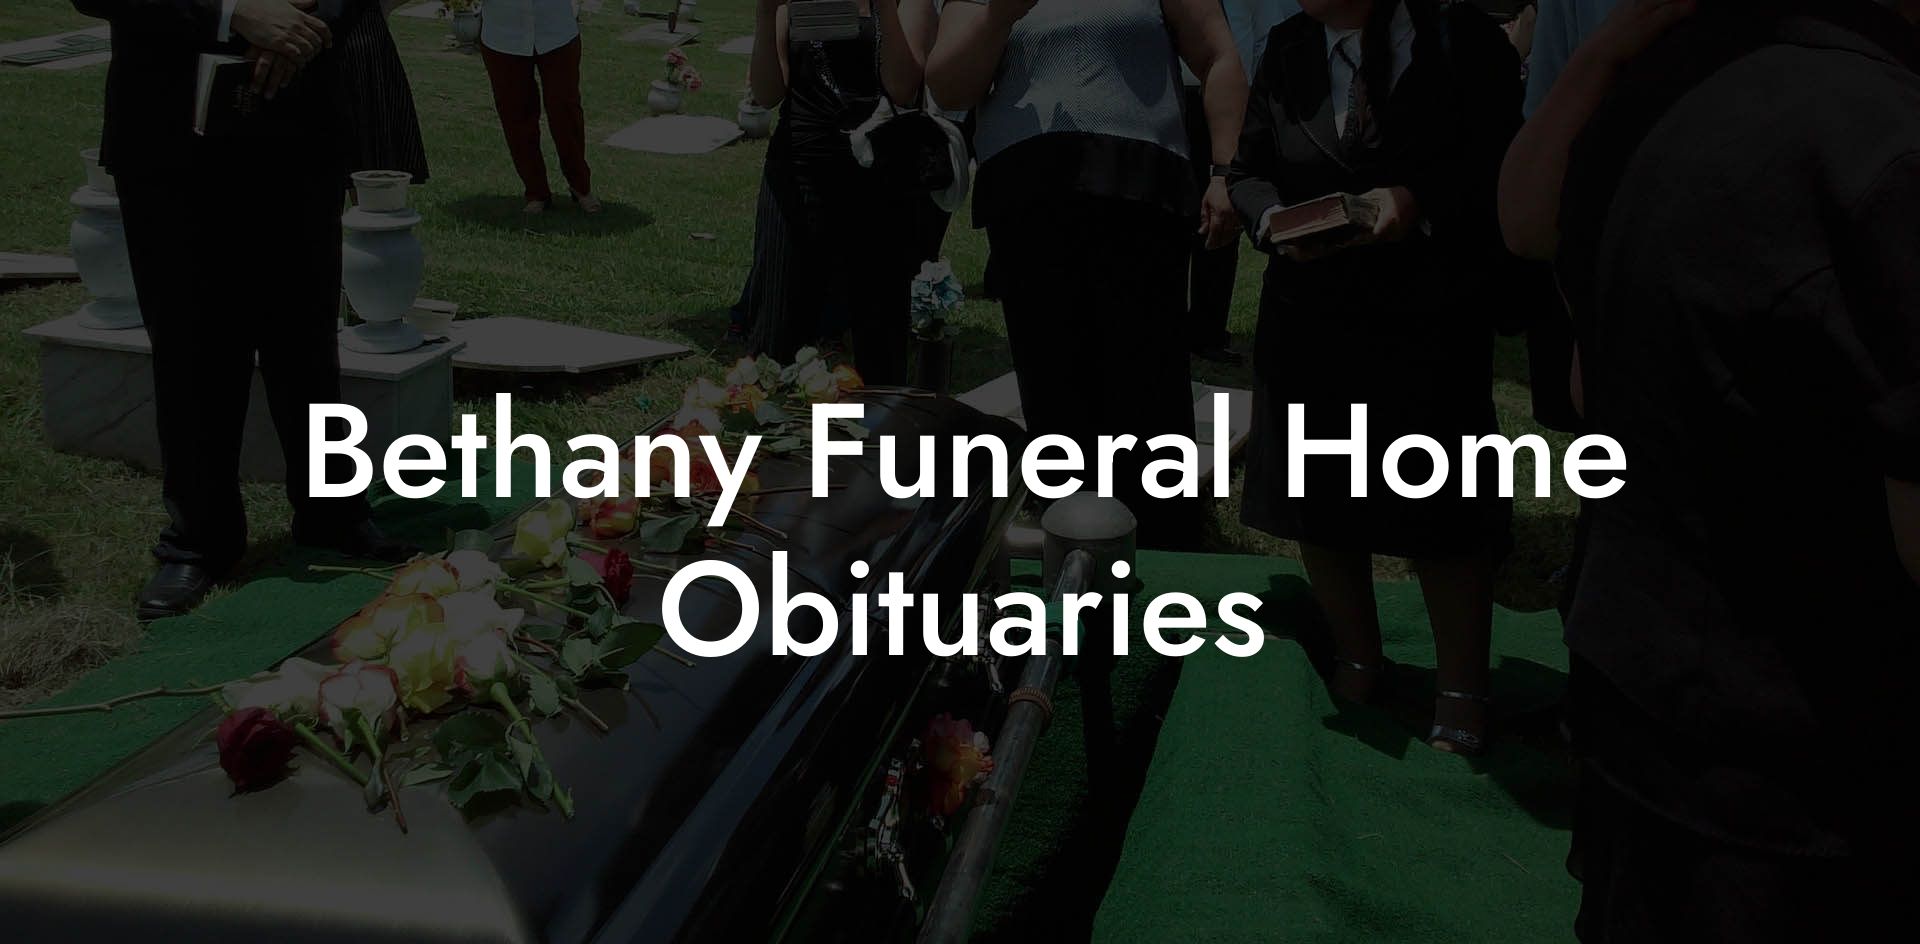 Bethany Funeral Home Obituaries